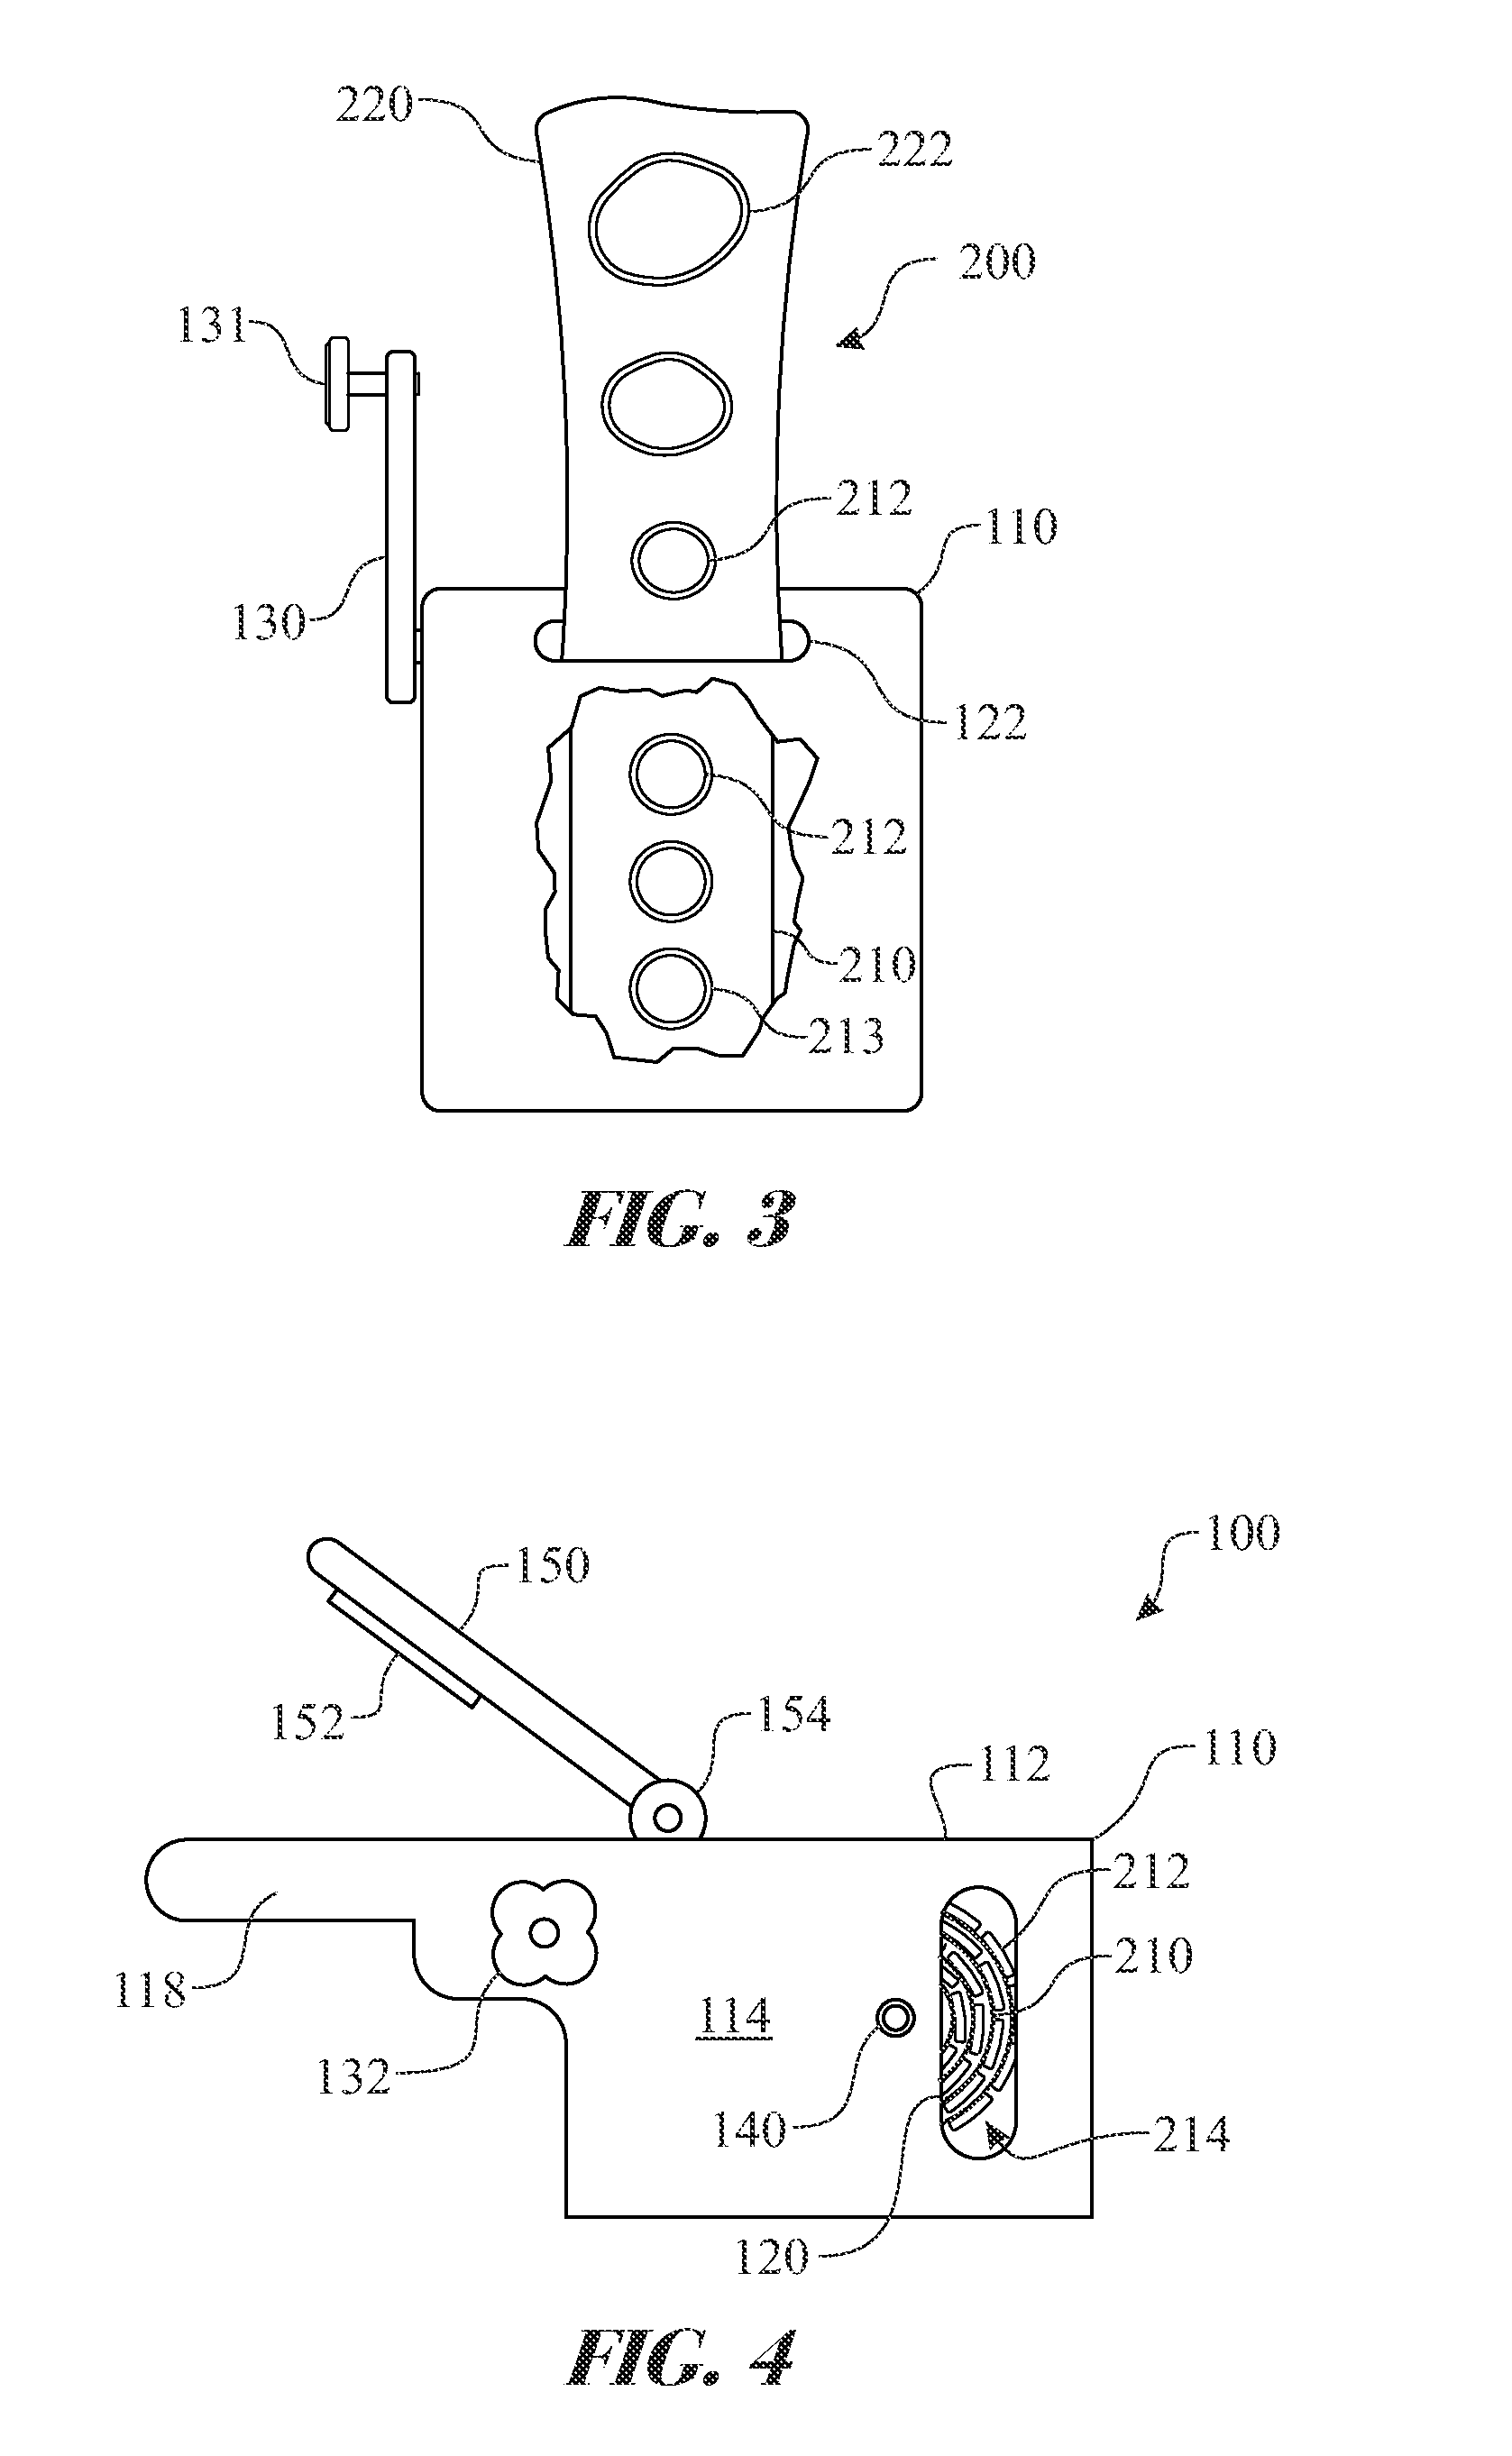 Strip arrayed stethoscope covers and dispensing apparatus